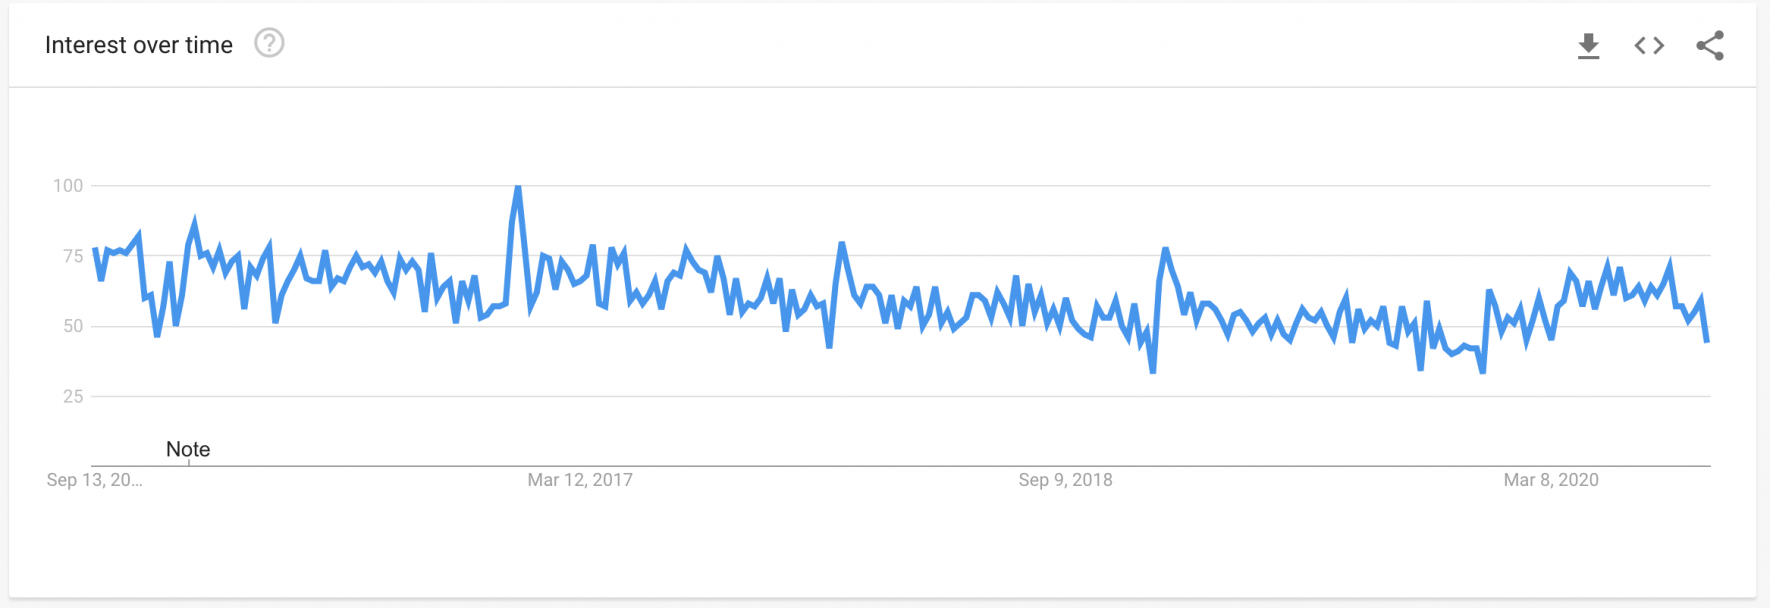 How to start a blog: interest over time